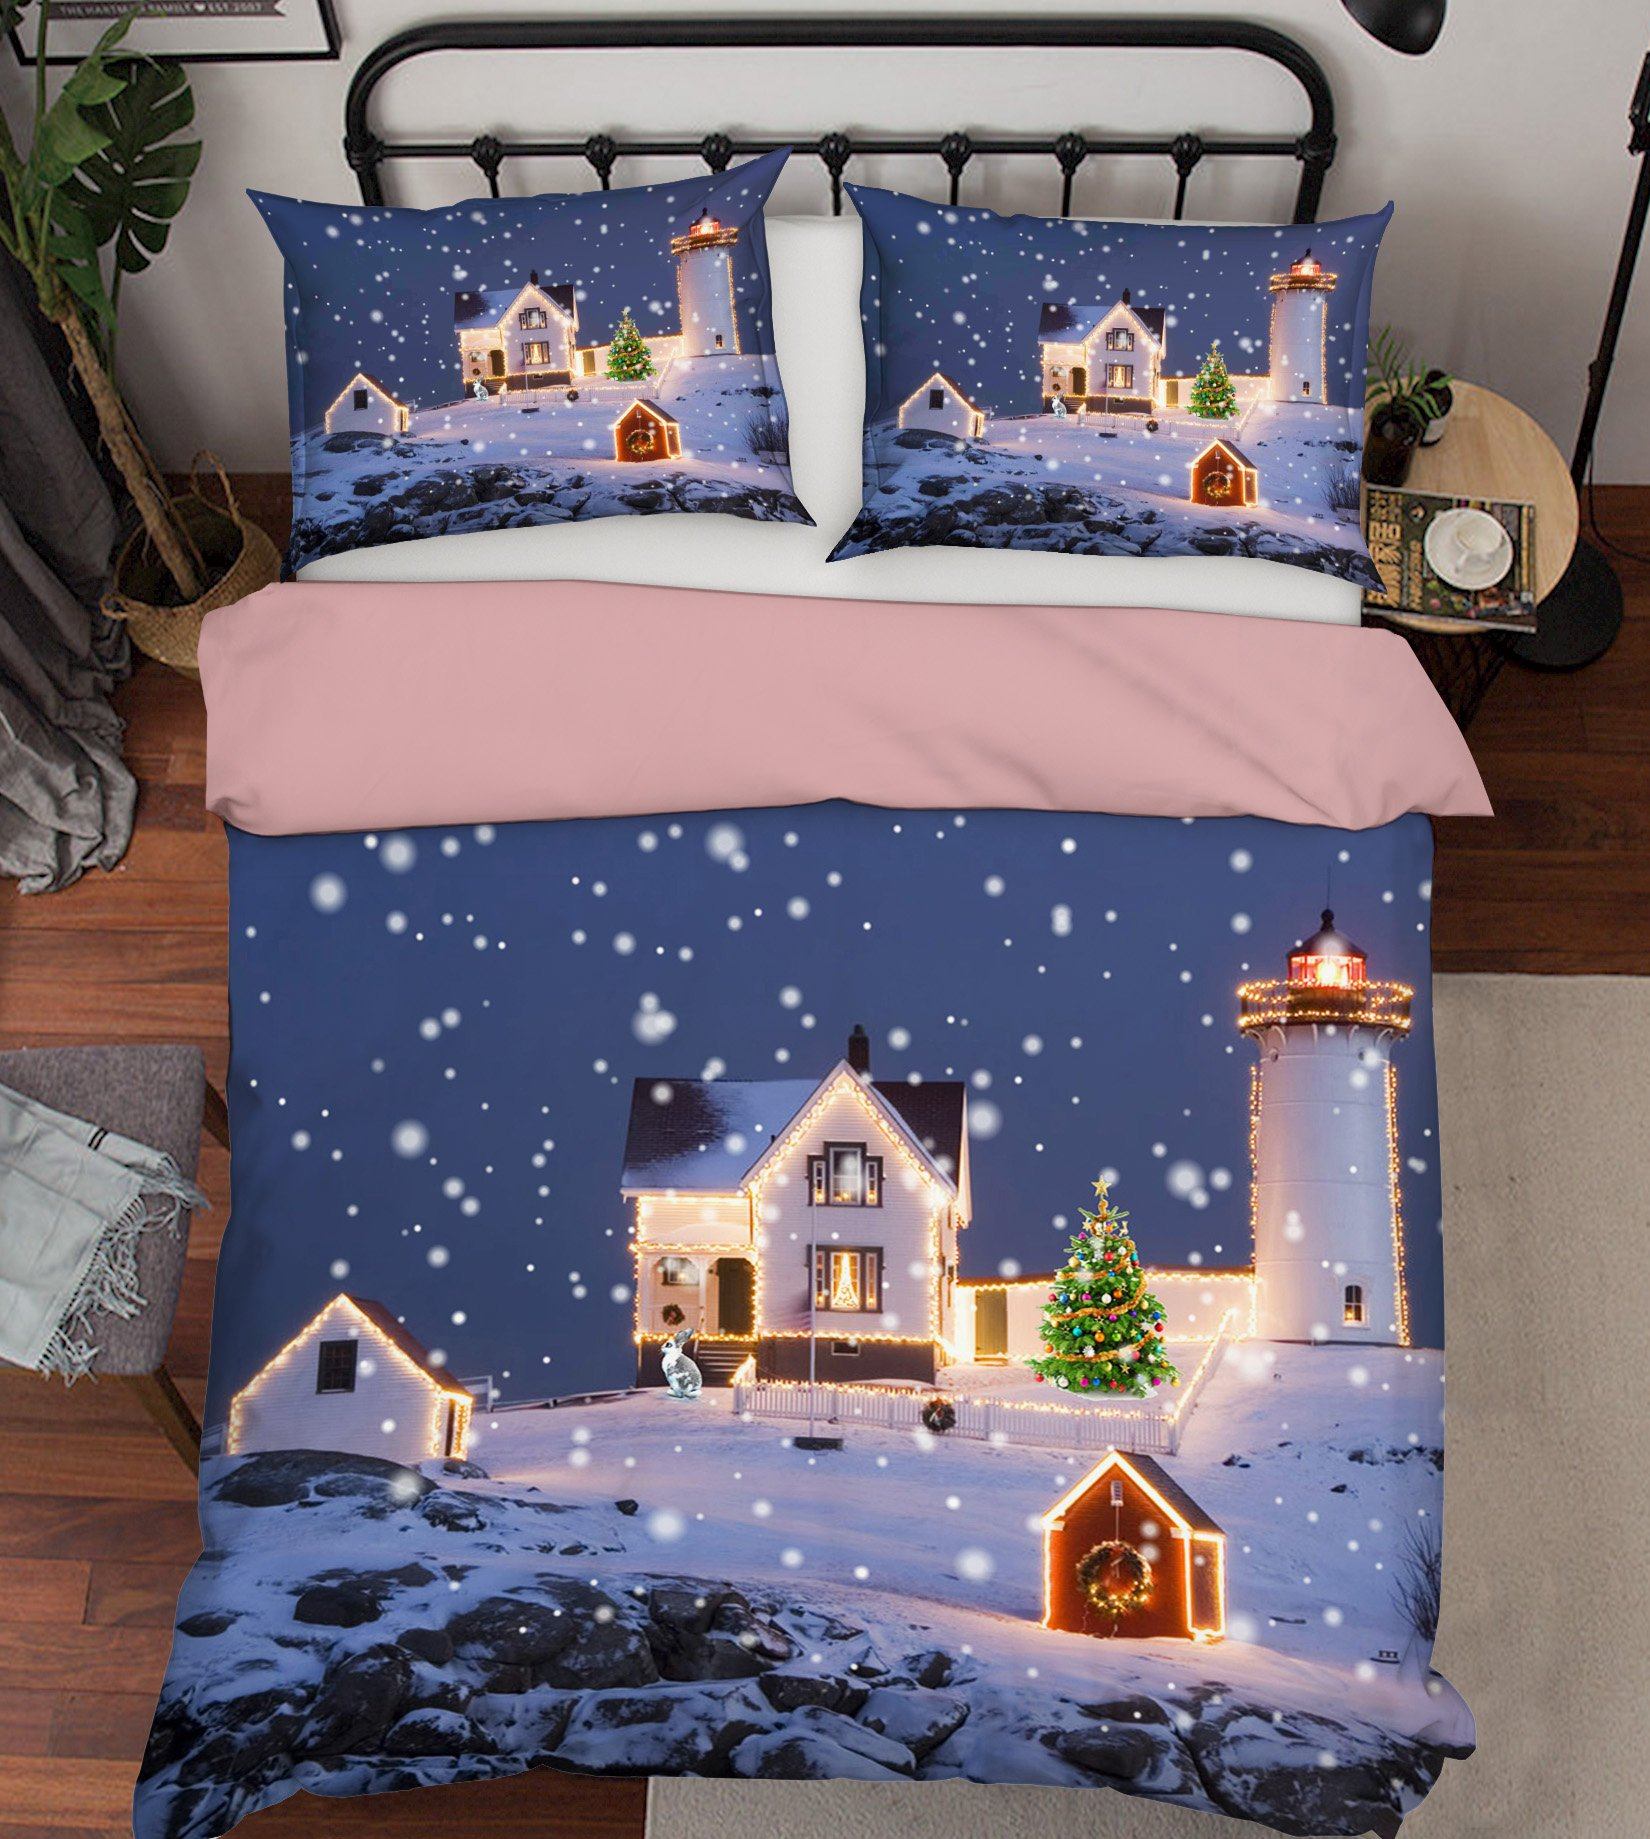 3D Neon Christmas Tree 37 Bed Pillowcases Quilt Quiet Covers AJ Creativity Home 